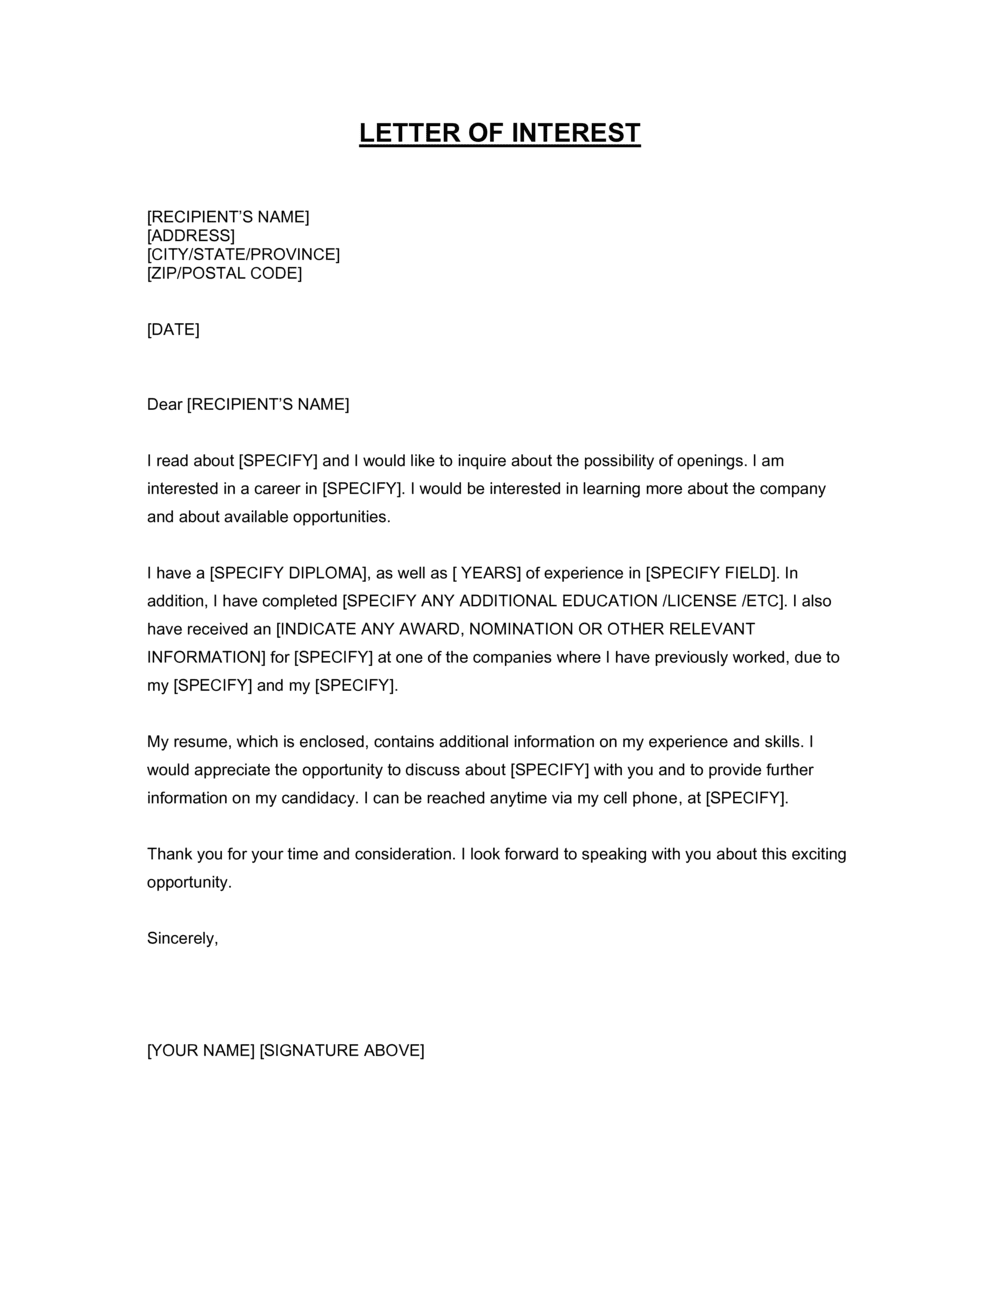 Letter Of Interest Template  by Business-in-a-Box™ Intended For Letter Of Interest Template Microsoft Word